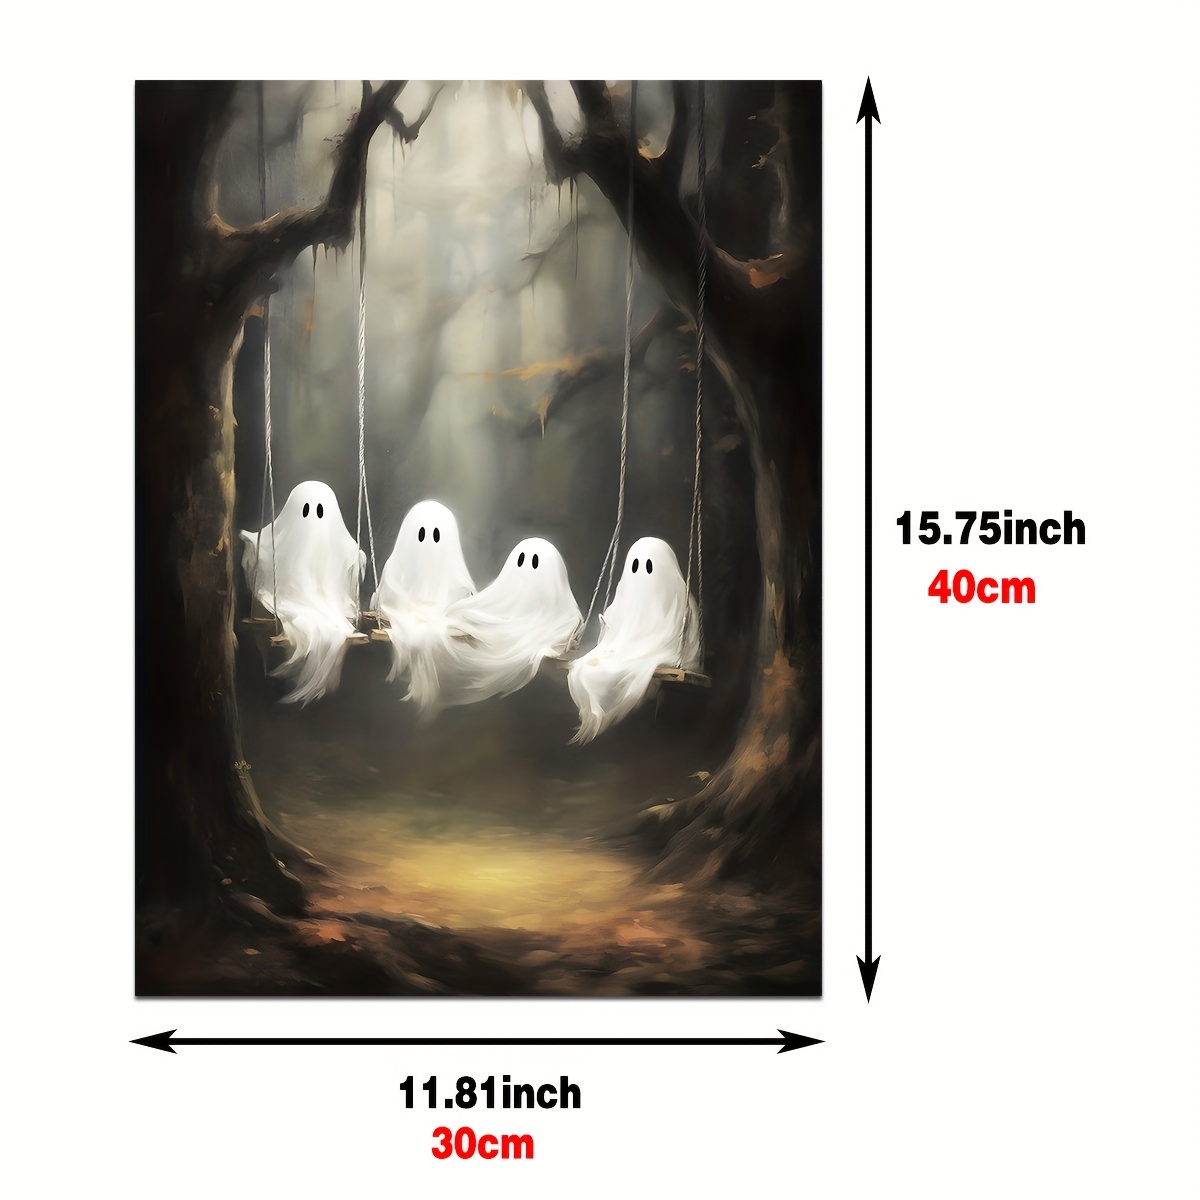 Four Cute Ghosts On A Swing In Fall Woods Print Poster, Dark